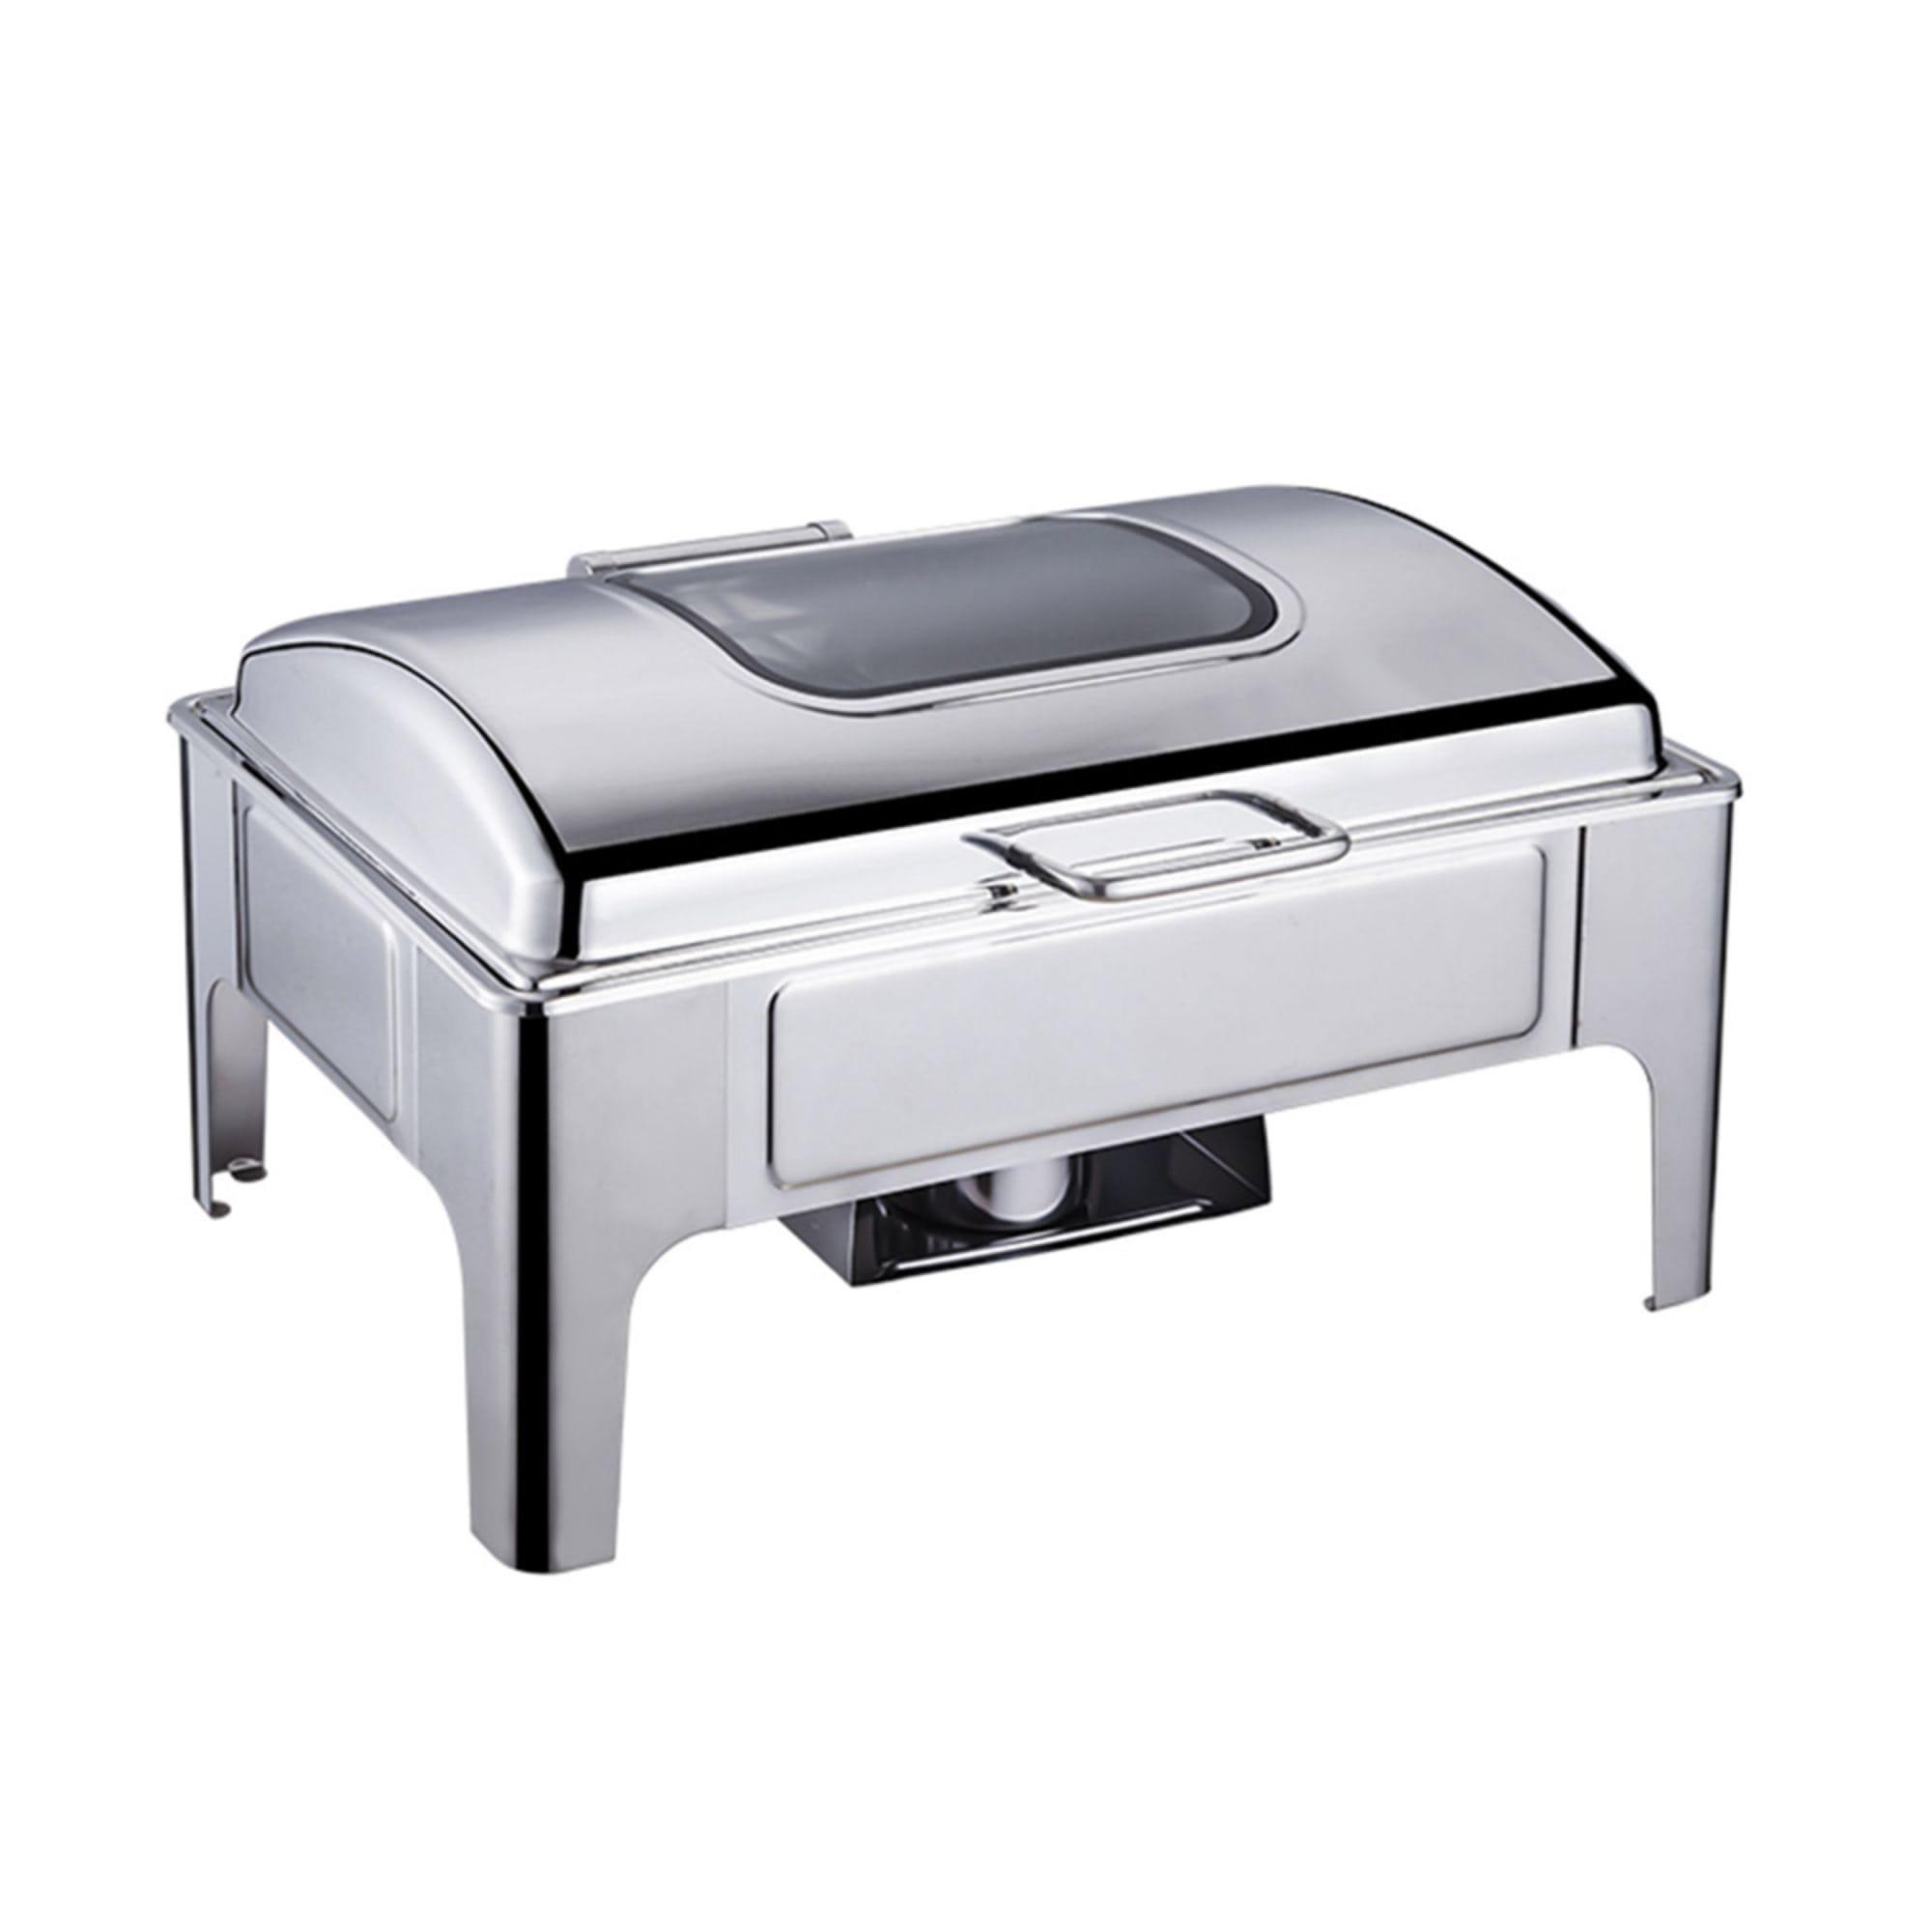 Soga Rectangular Stainless Steel Chafing Dish with Window Lid Image 4